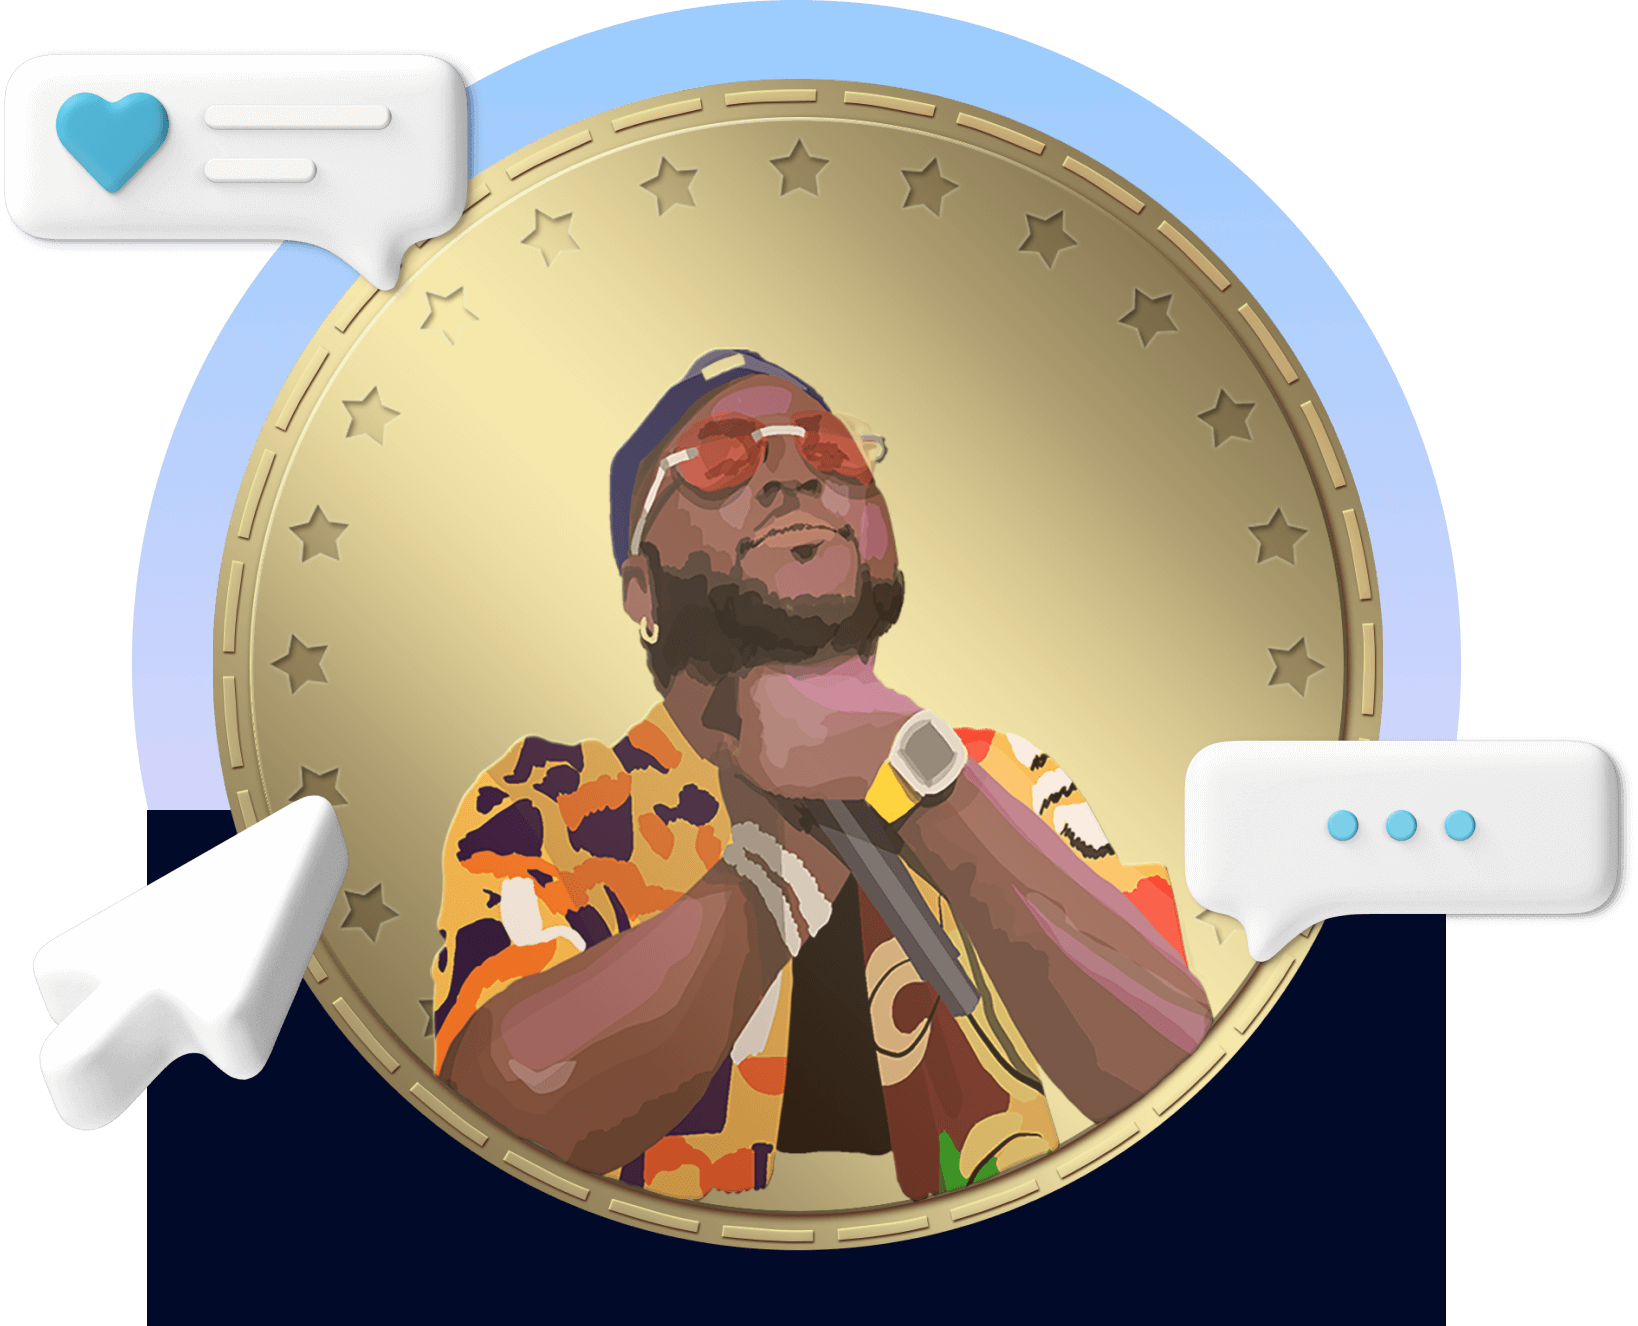 Davido launches his own cryptocurrency, “$ECHOKE”